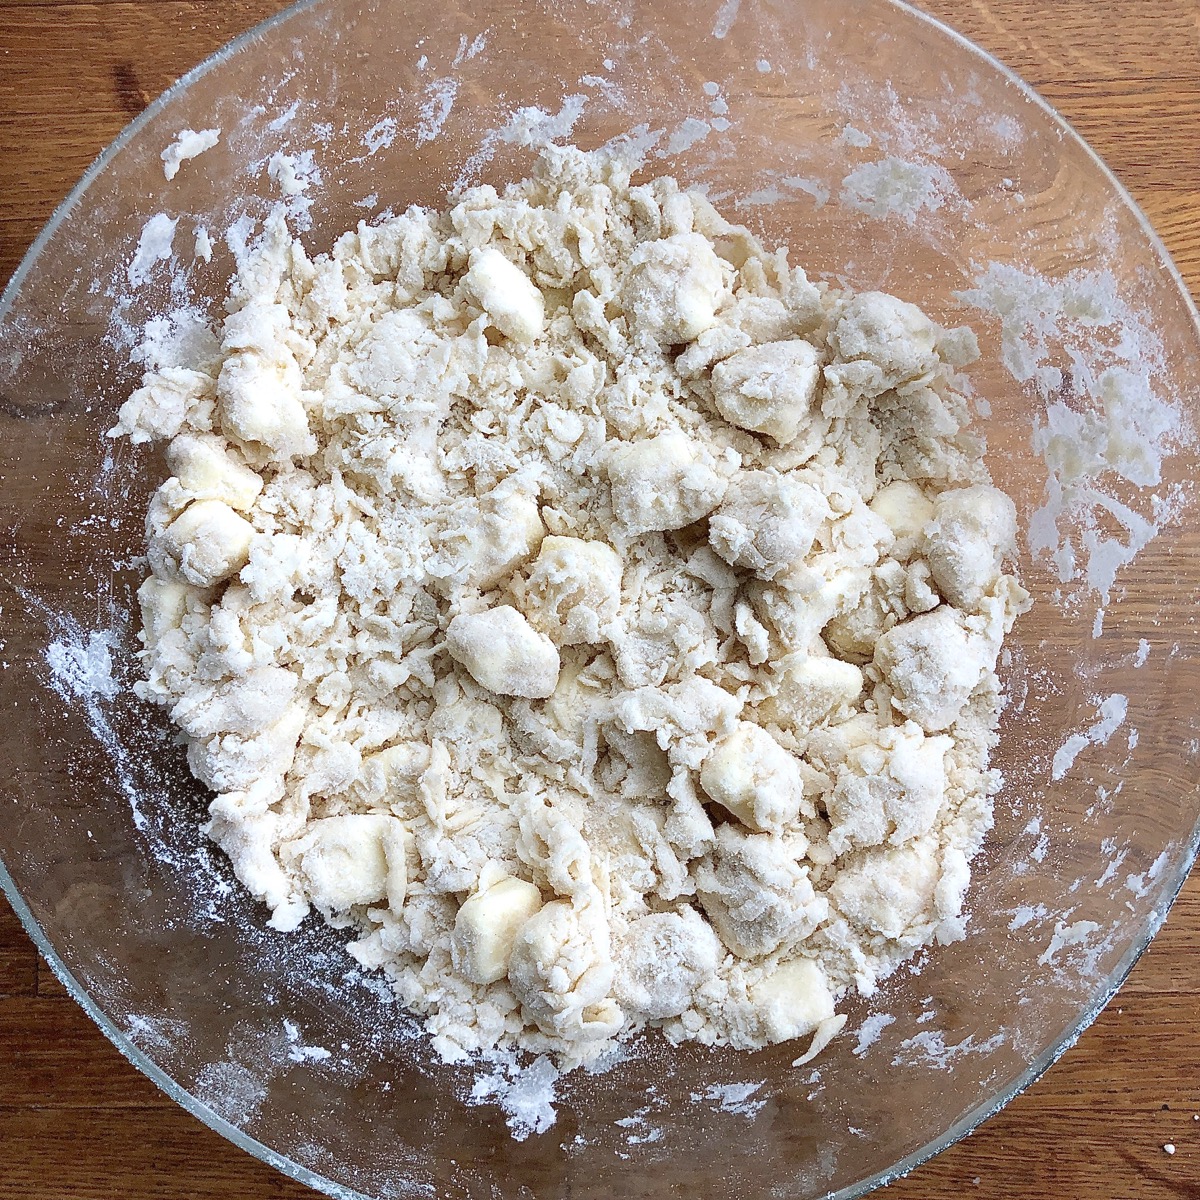 Clumps of pie dough in a bowl, dry but starting to become cohesive.